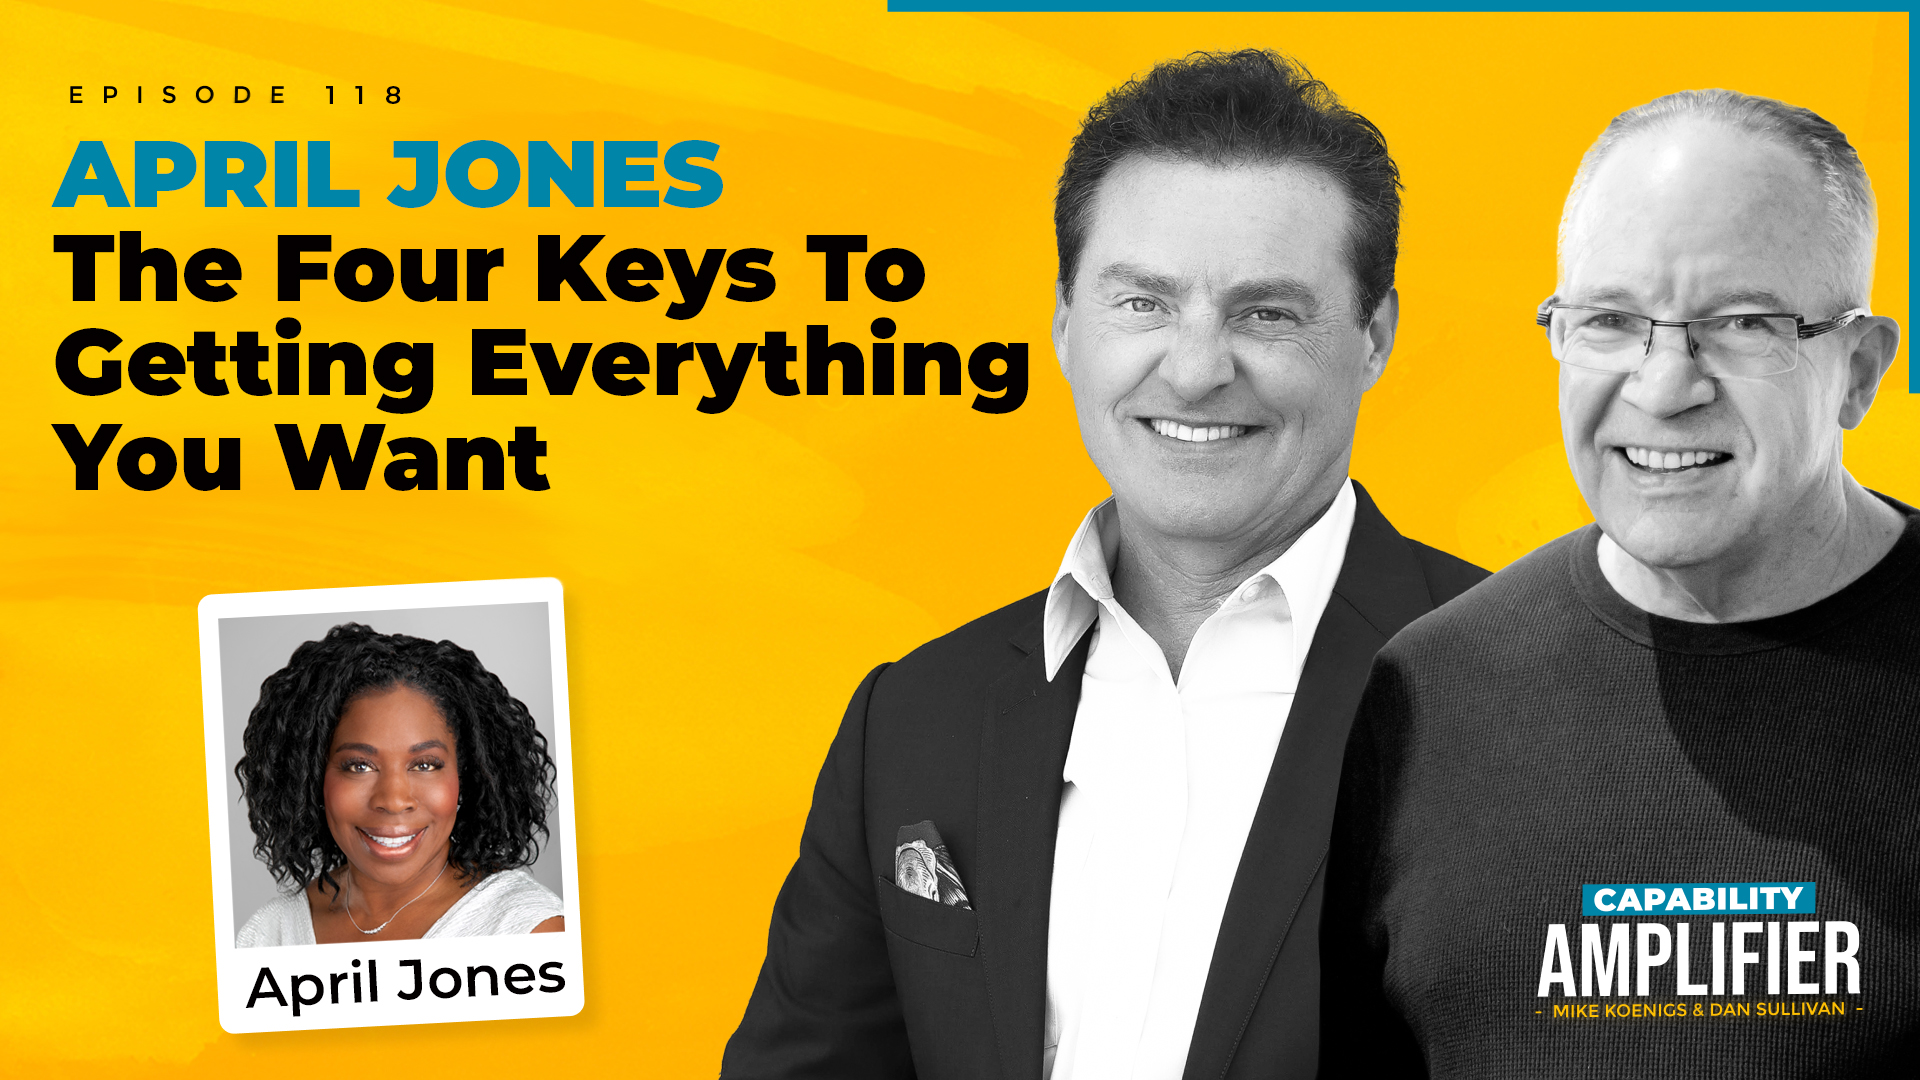 Episode 118 Art: Text reading "APRIL JONES The Four Keys to Getting Everything You Want" on a yellow background with photos of Mike Koenigs, Dan Sullivan and April Jones